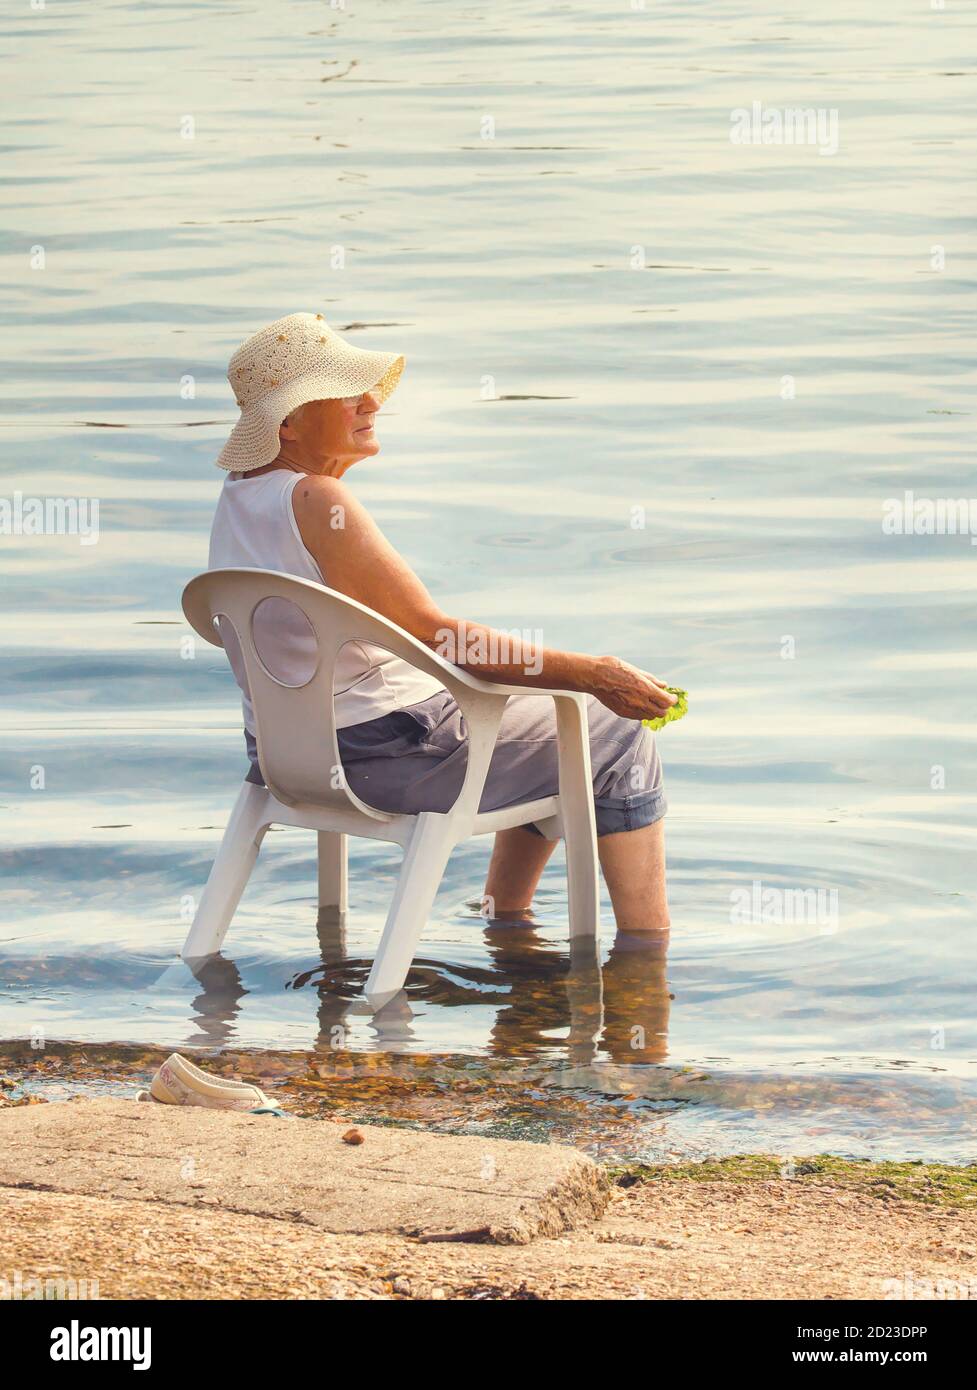 Elderly Lady In A Straw Hat With Shoes And Socks Off And Trousers Rolled Up Sitting On A Plastic Chair In The Sea Cooling Off In The Summer Sun. Stock Photo